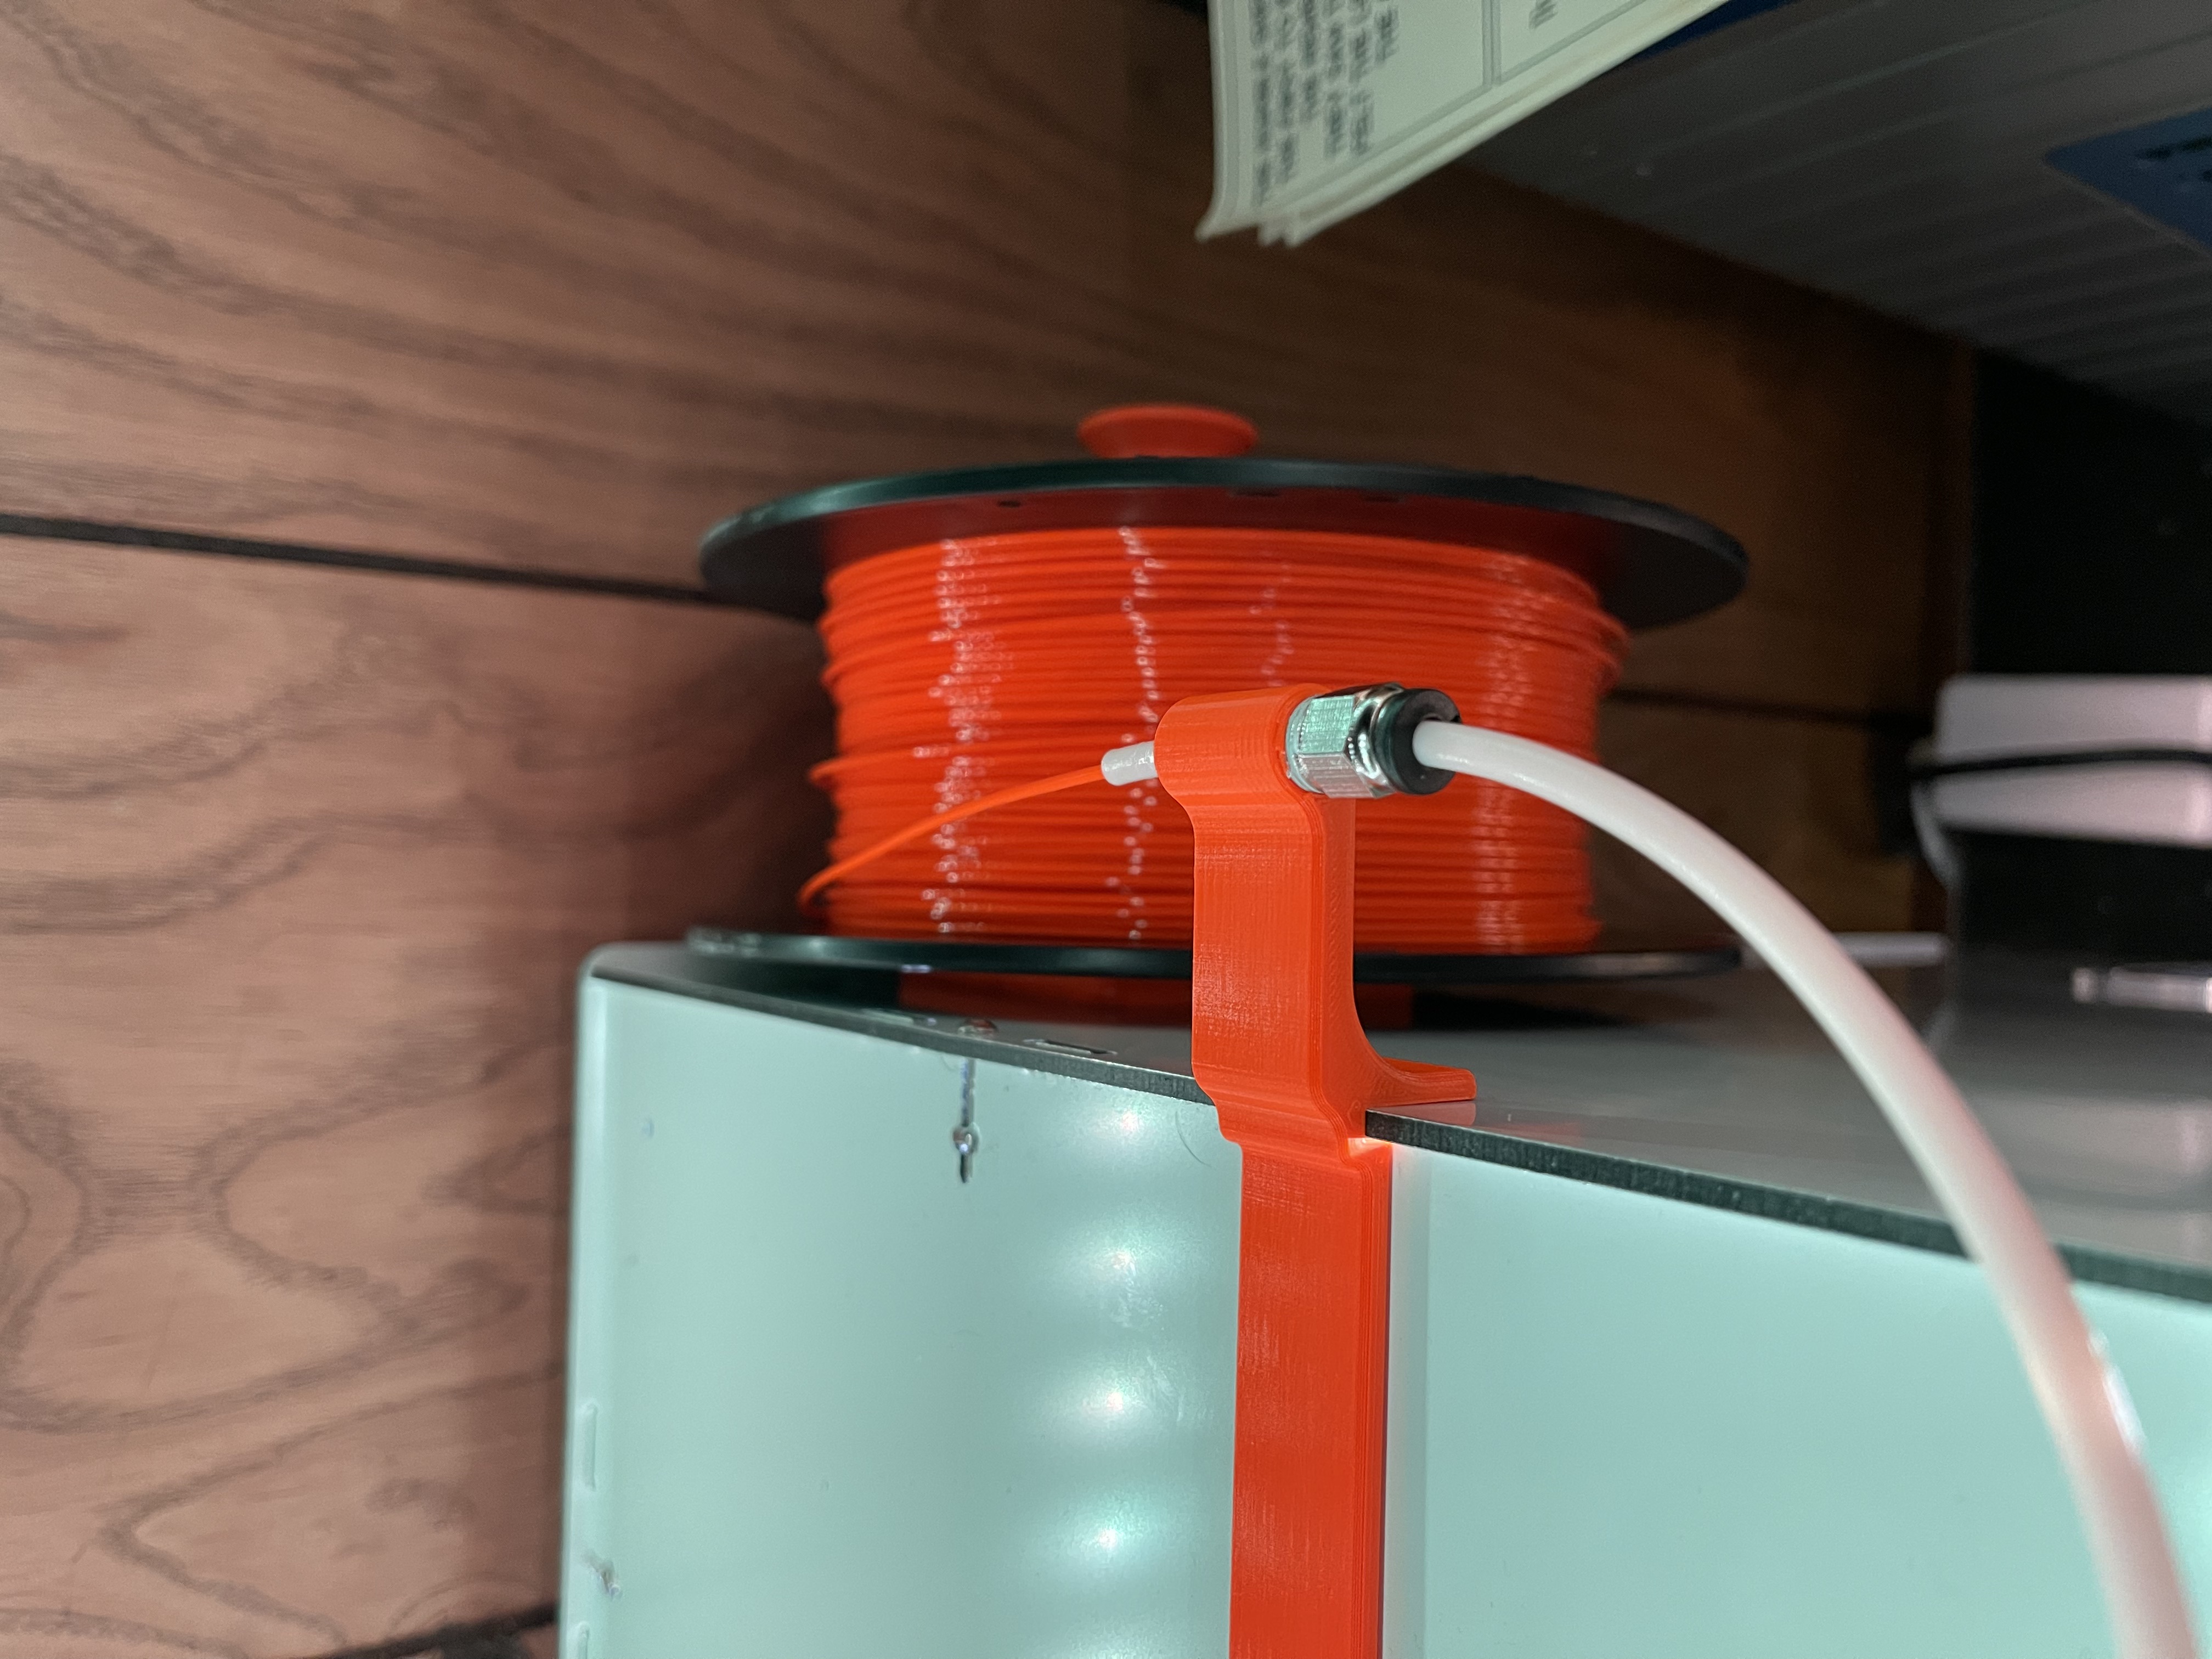 Top Filament Guide for Printed Solid Next Gen Safety Enclosure